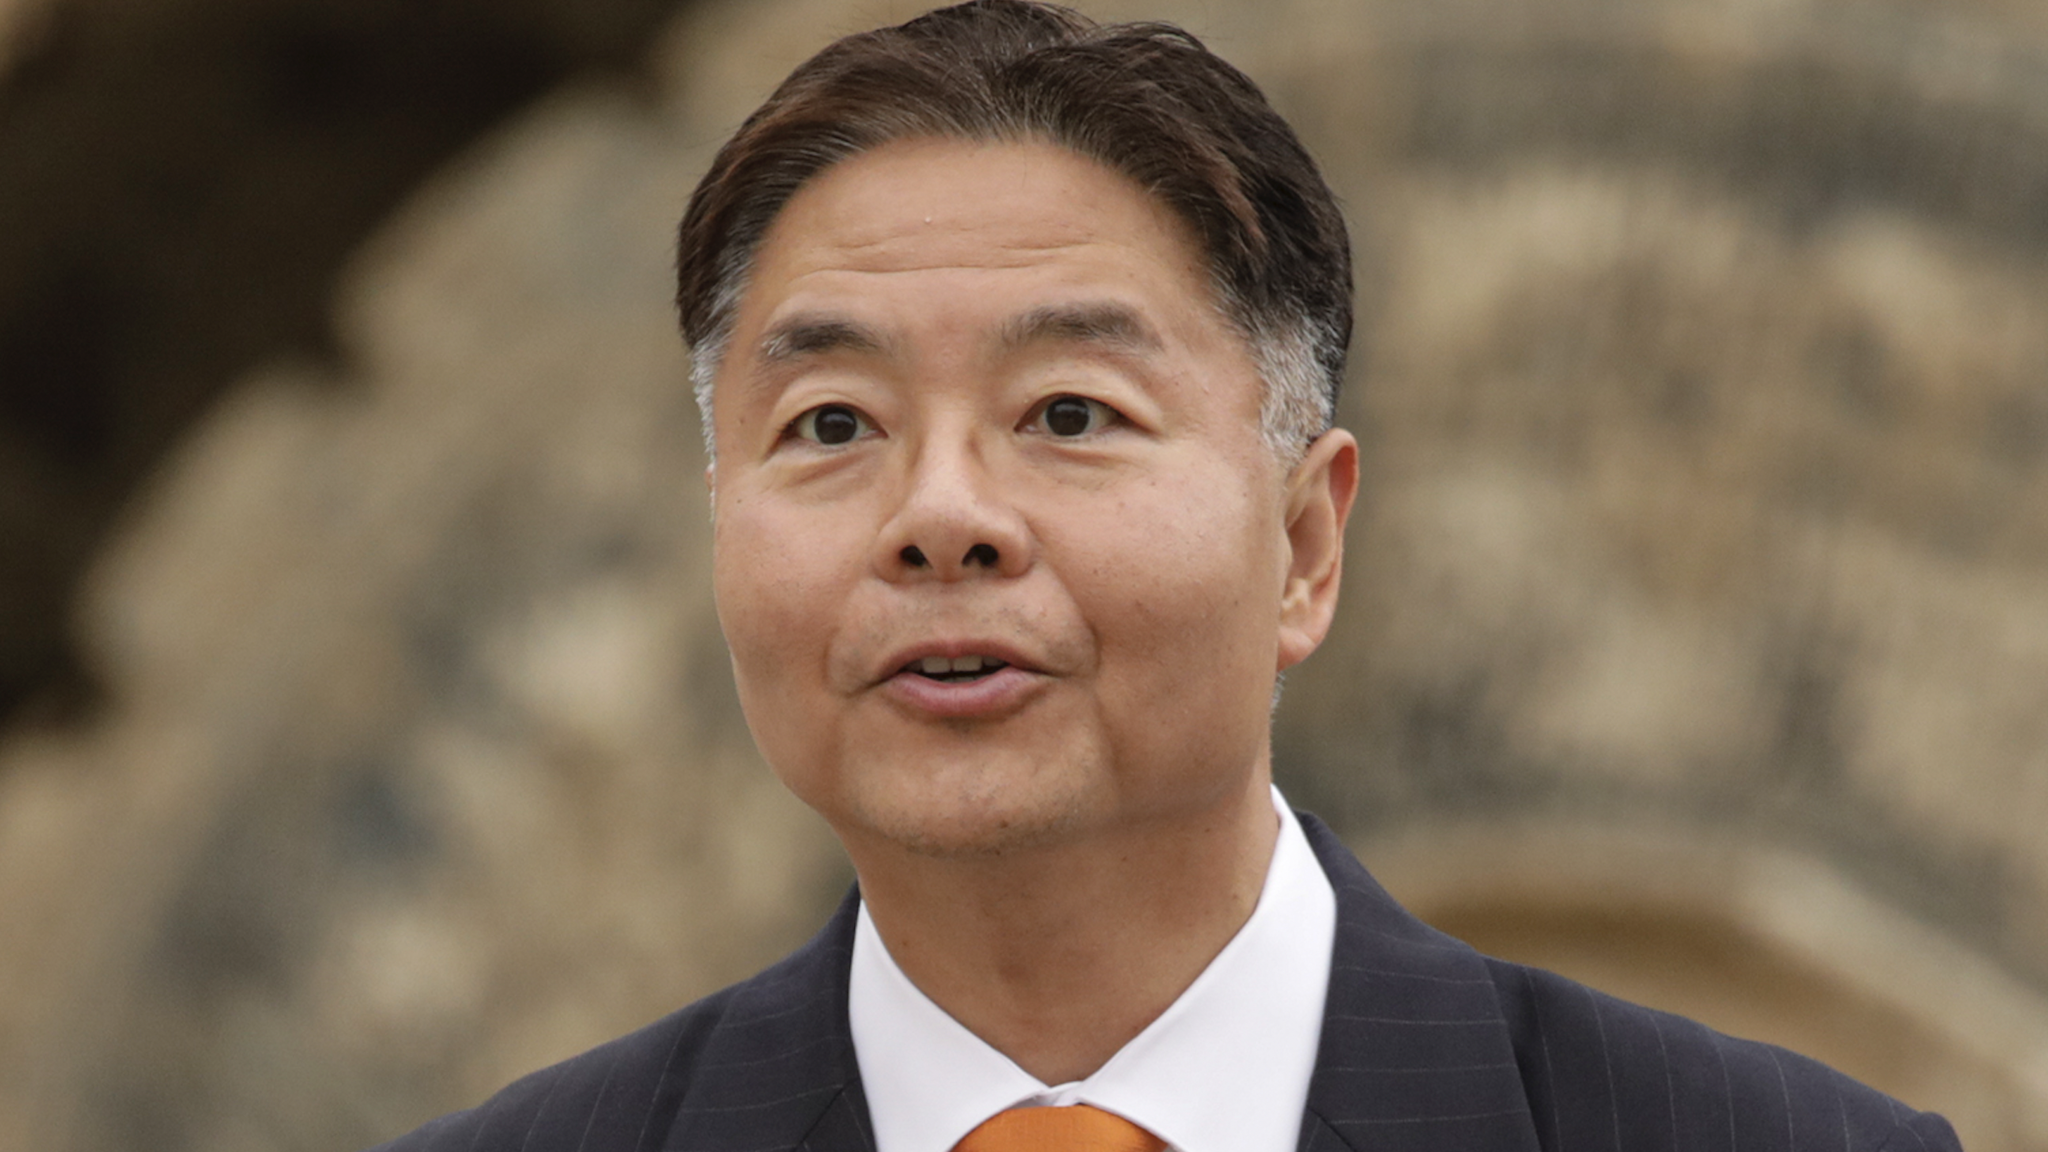 Los Angeles, CA - October 13: Congressman Ted Lieu at a press conference addressed by President Joe Biden at the construction site for the future terminus of the Metro D (Purple) Line near the West Los Angeles VA Campus on Thursday, Oct. 13, 2022 in Los Angeles, CA.